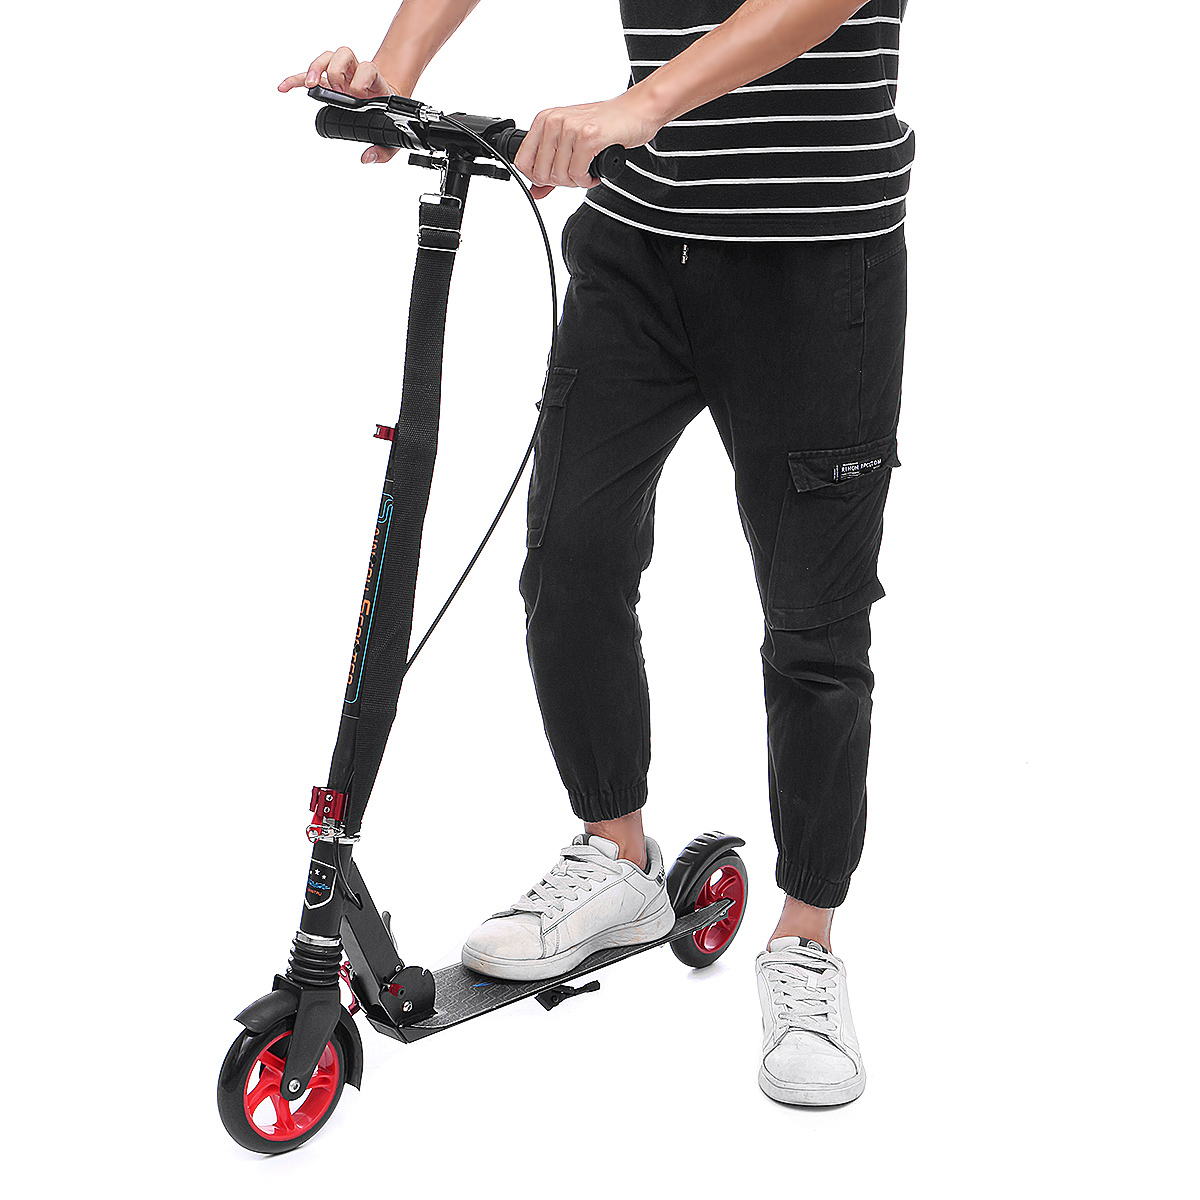 Tenboom Aluminum Scooter for Kids Ages 6-12 20mm Large Wheels Folding Adjustable Kids Adults Micro Scooter with Dual Suspension Rear Foot Brak and Free Carry Strap